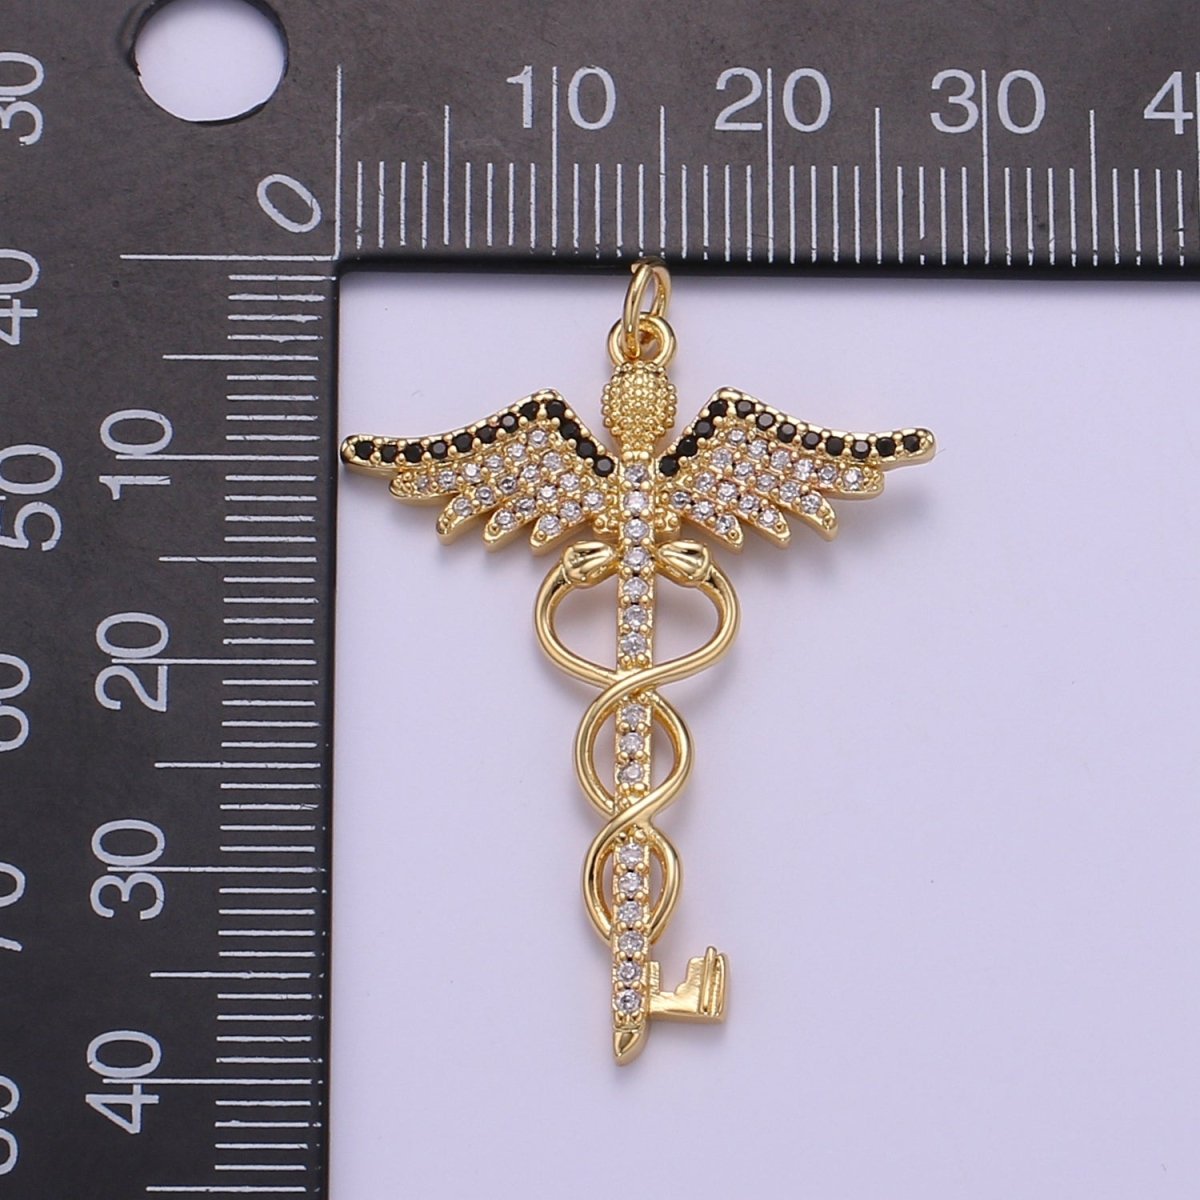 Gold Caduceus Pendant Charm Necklace Career Professional Medical Fashion Jewelry For Women Gifts For Her E-817 - DLUXCA